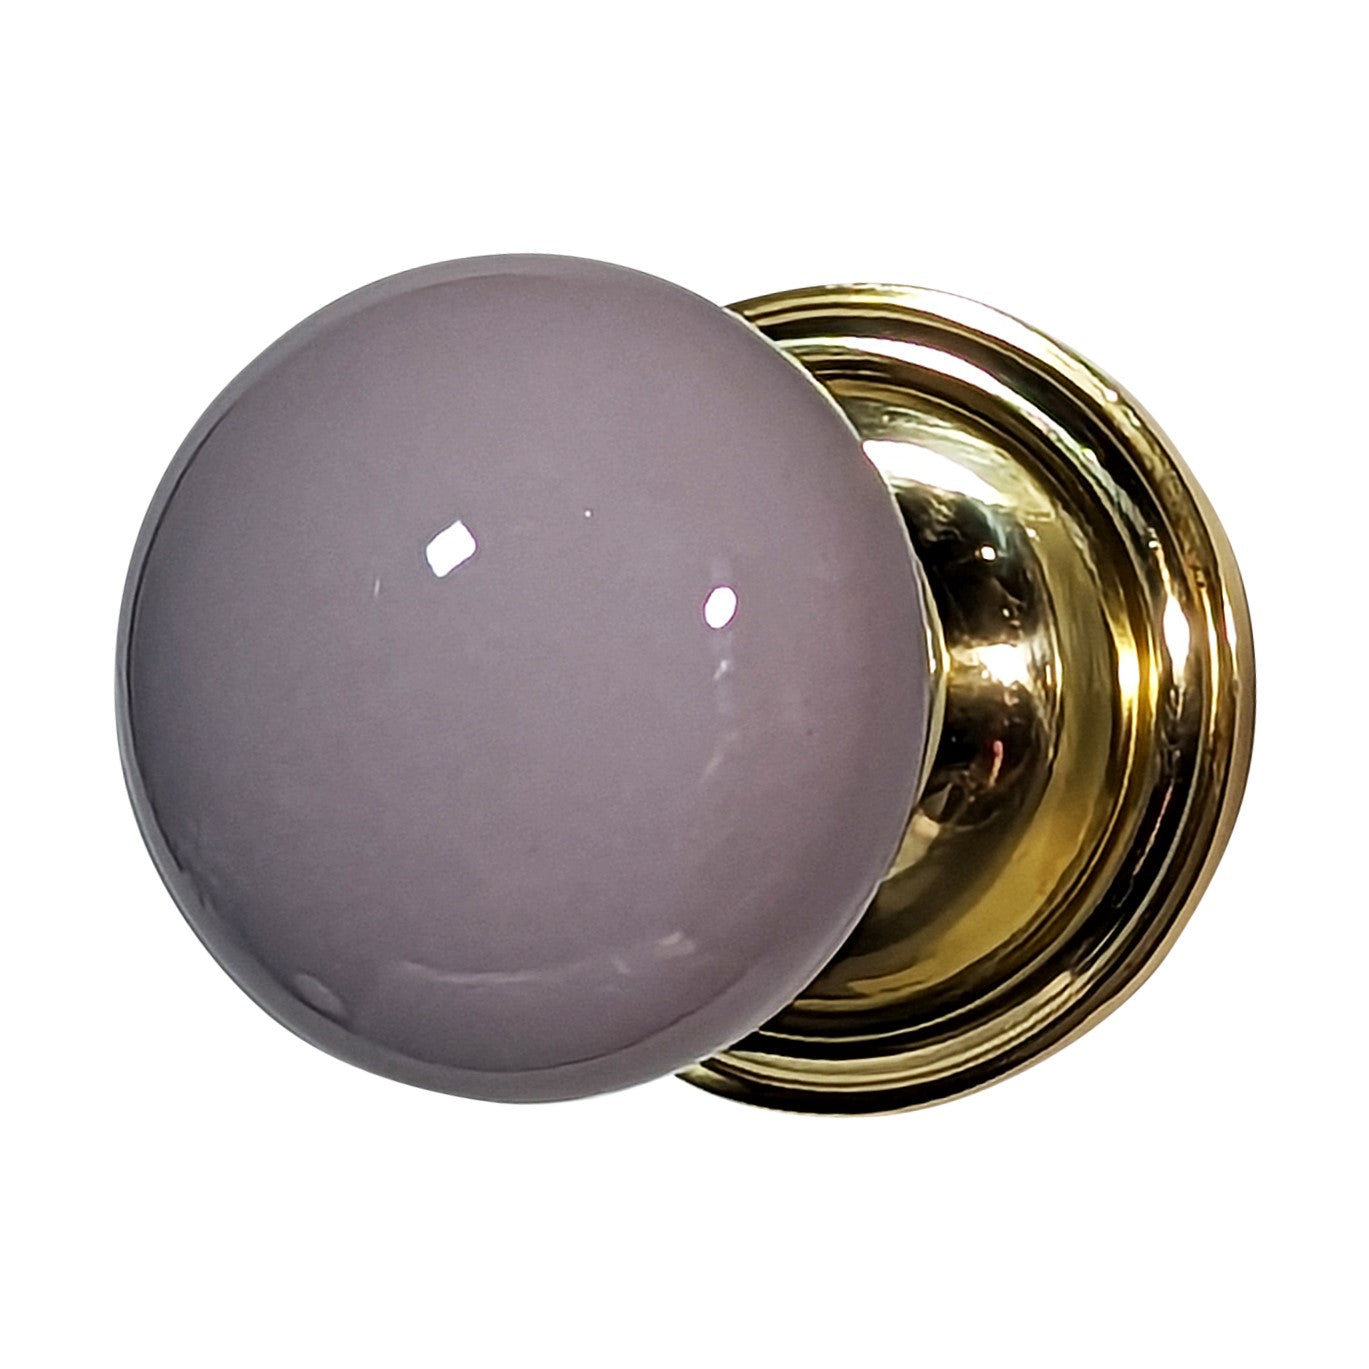 Grey Porcelain Door Knob with Traditional Rosette (Several Finishes Available)